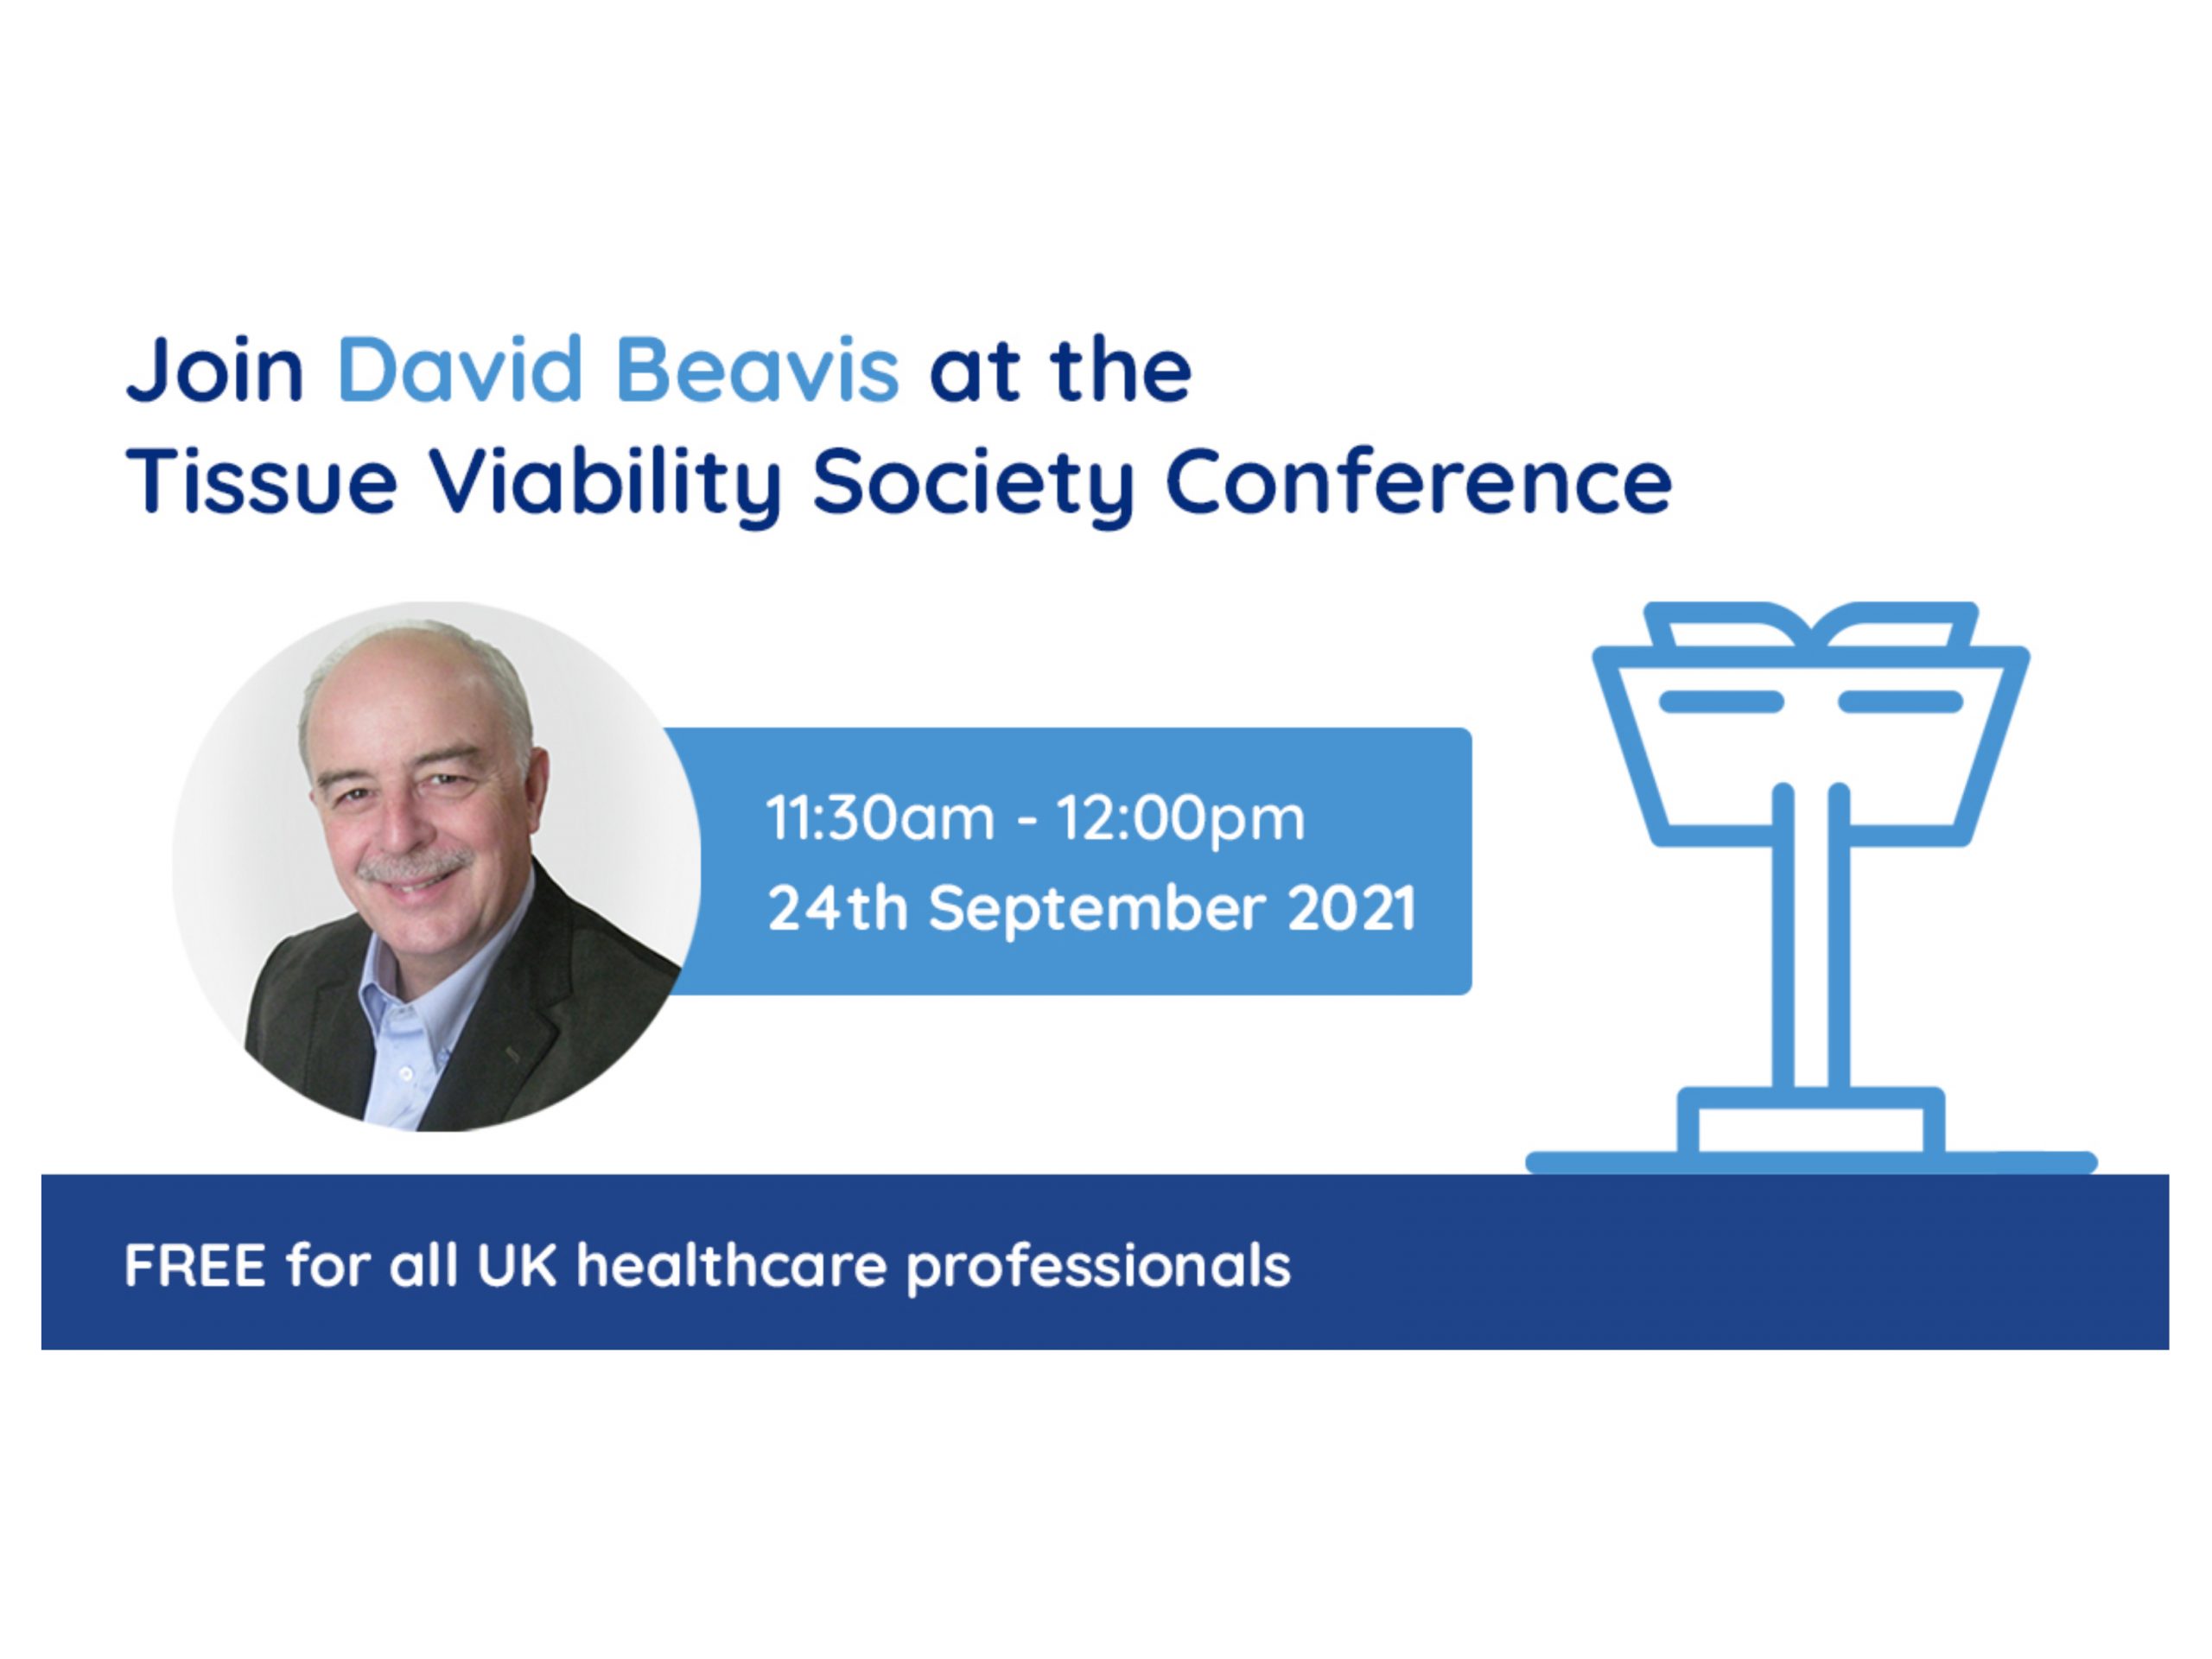 David Beavis to introduce tissue viability clinicians to the BHTA this September